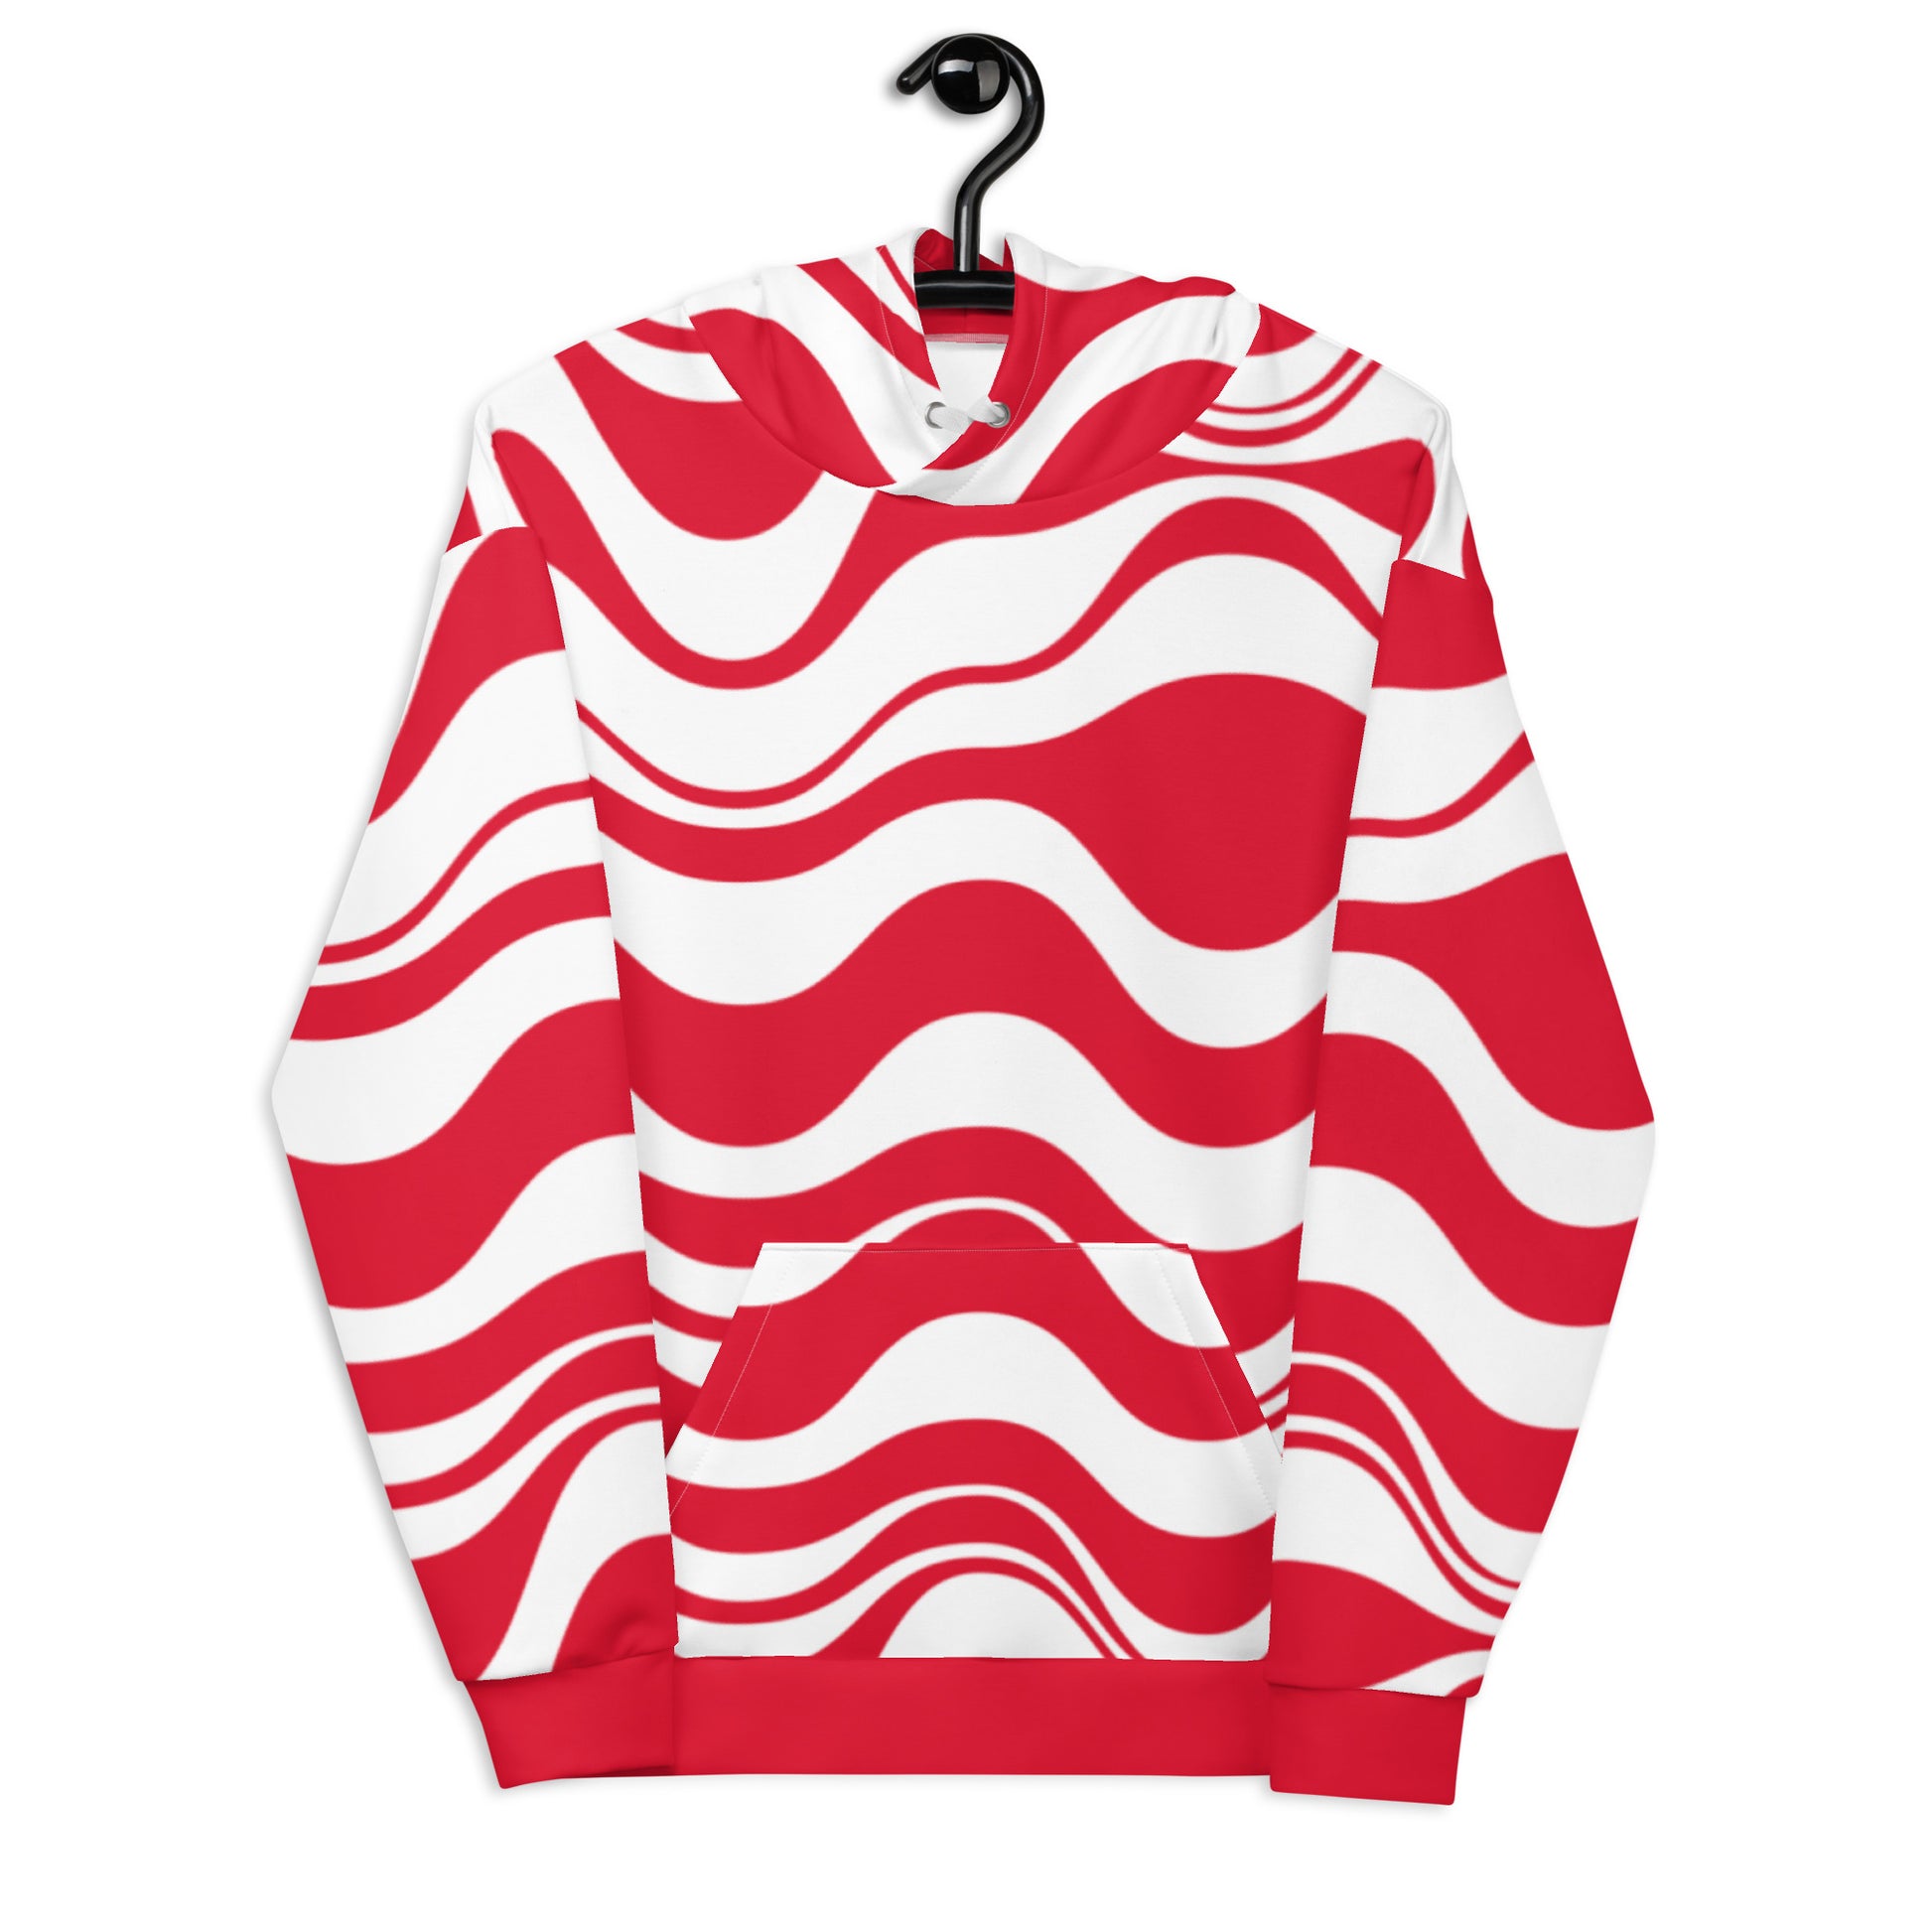 ENERGY WAVES red - Unisex Hoodie (recycled) - SHALMIAK